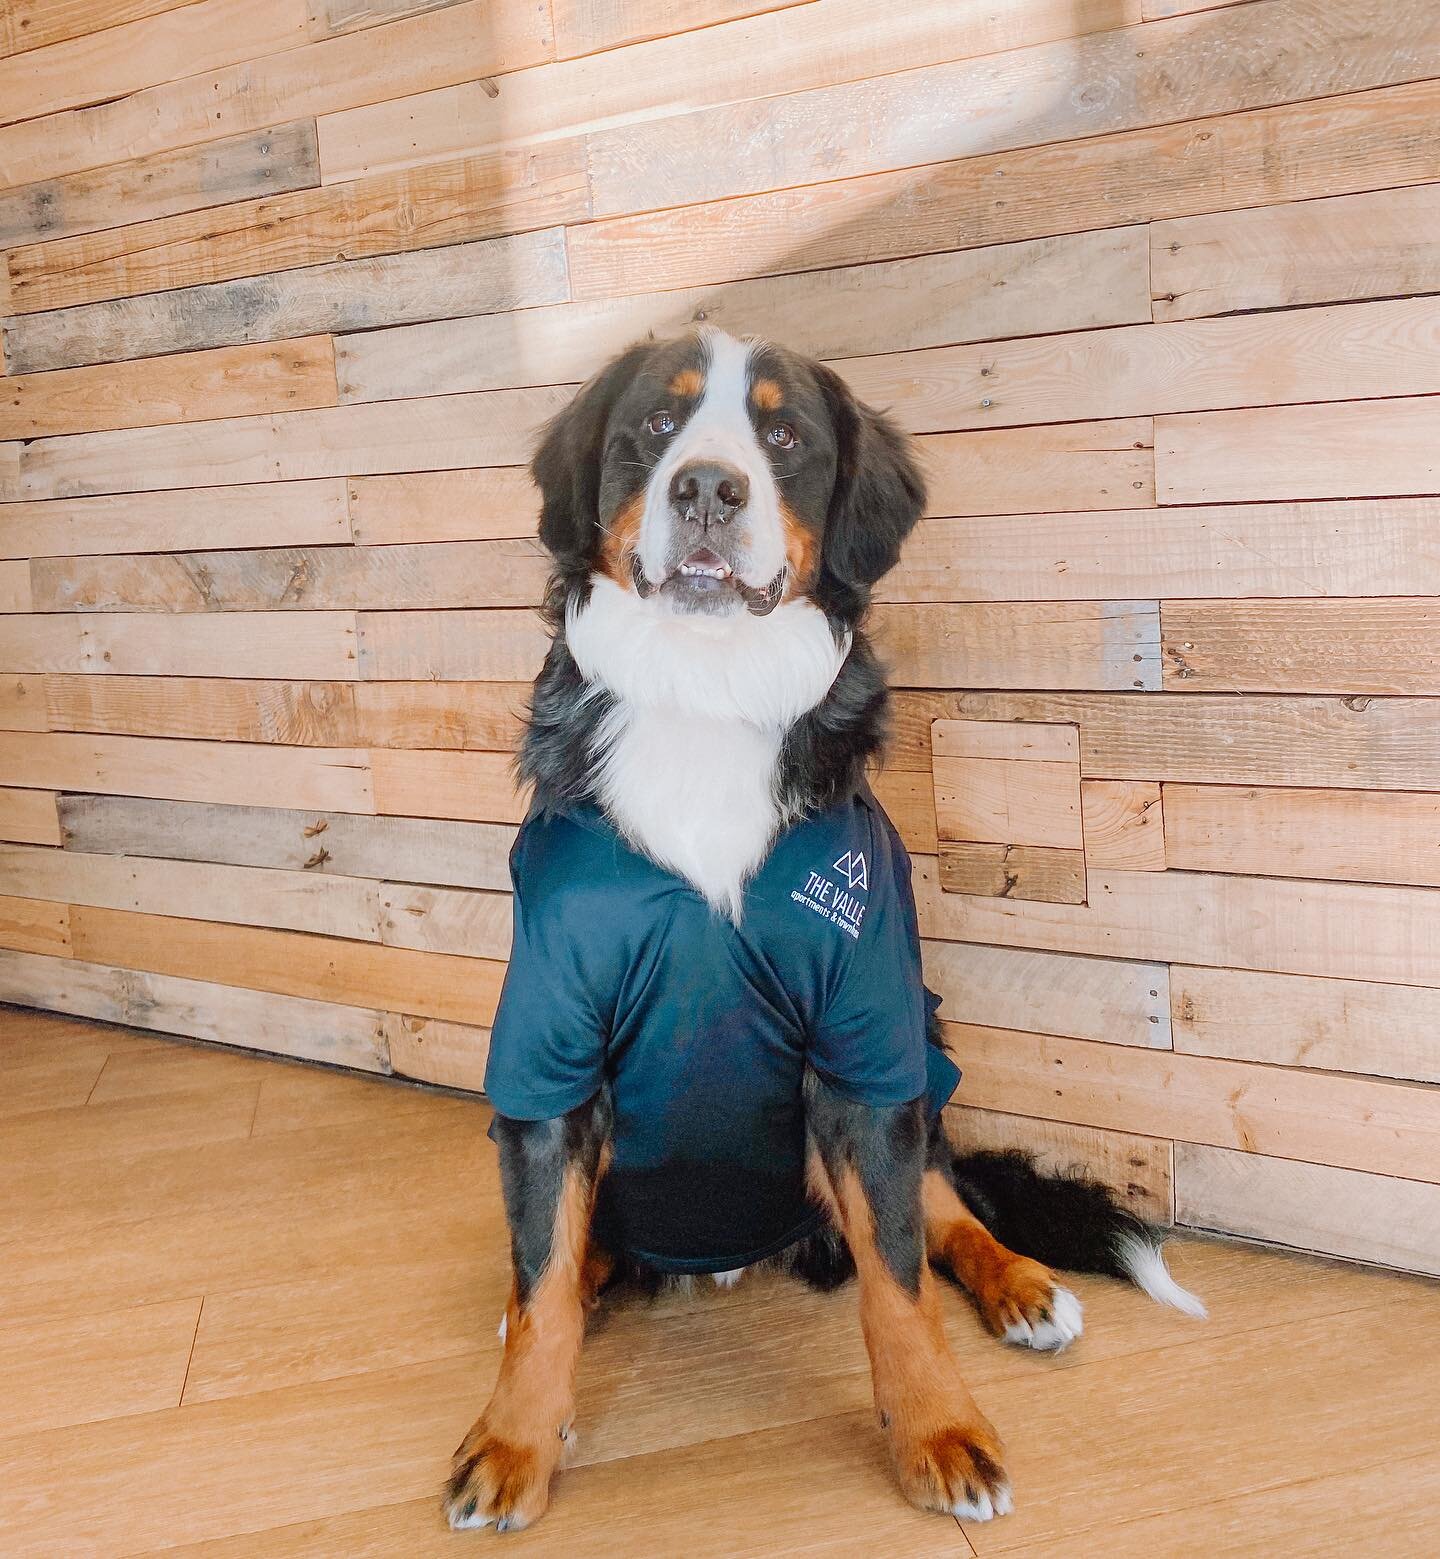 Did you know we&rsquo;re hiring?! 🤩
Otis says &ldquo;come work at the Valley, come work with ME!&rdquo; 🐾 
DM us to see how to apply and be co workers with Otis! 🙌🏻